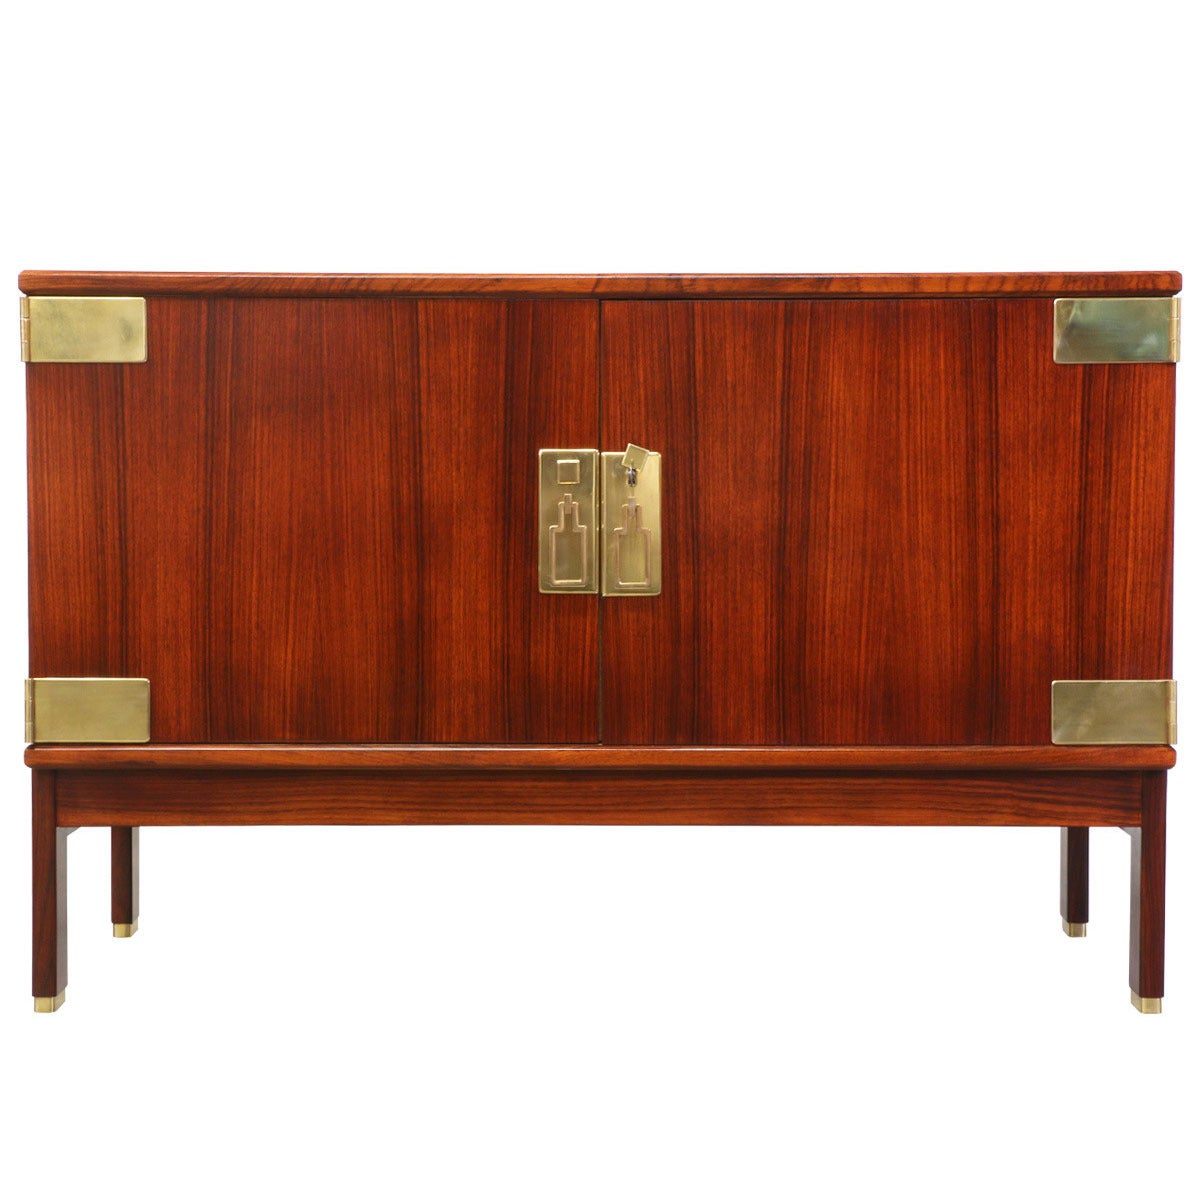 Danish Modern Rosewood Credenza with Brass Accents